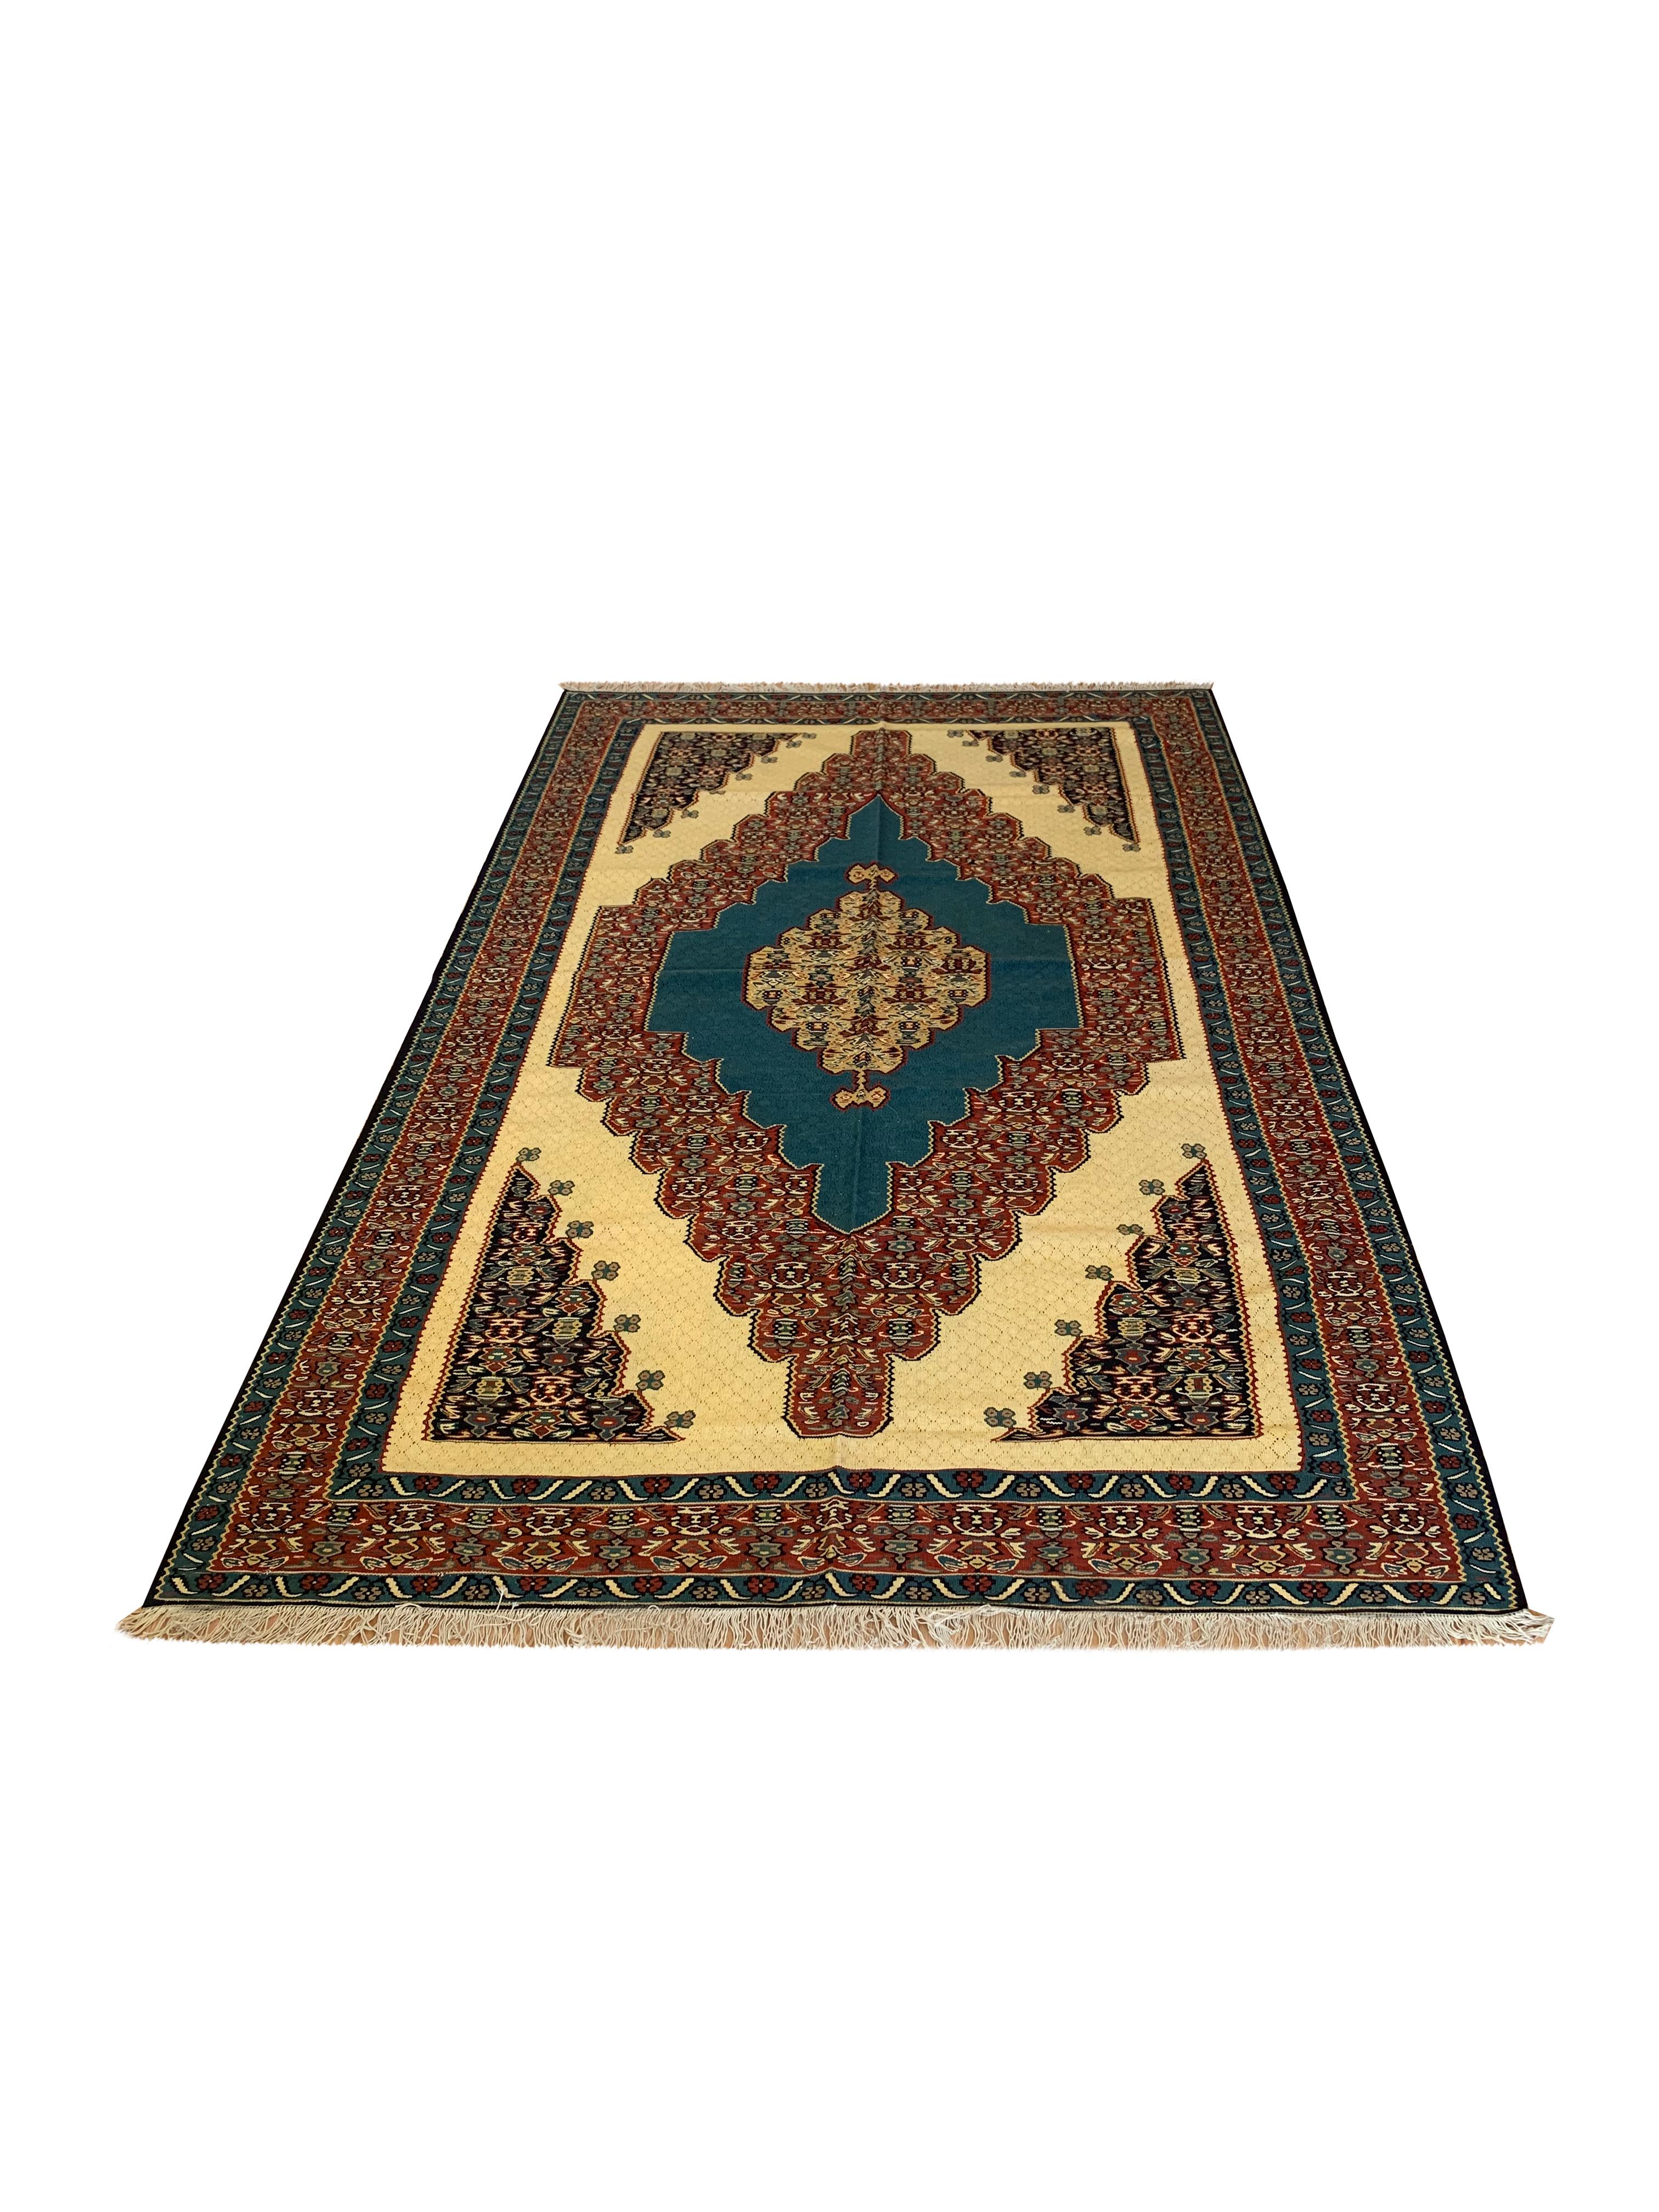 This beautiful wool carpet is a handmade, flatwoven kilim woven in the early 21st century, circa 2010. It is unused and so is in excellent condition. The design features a bold medallion design woven on a yellow background with blue, brown and cream